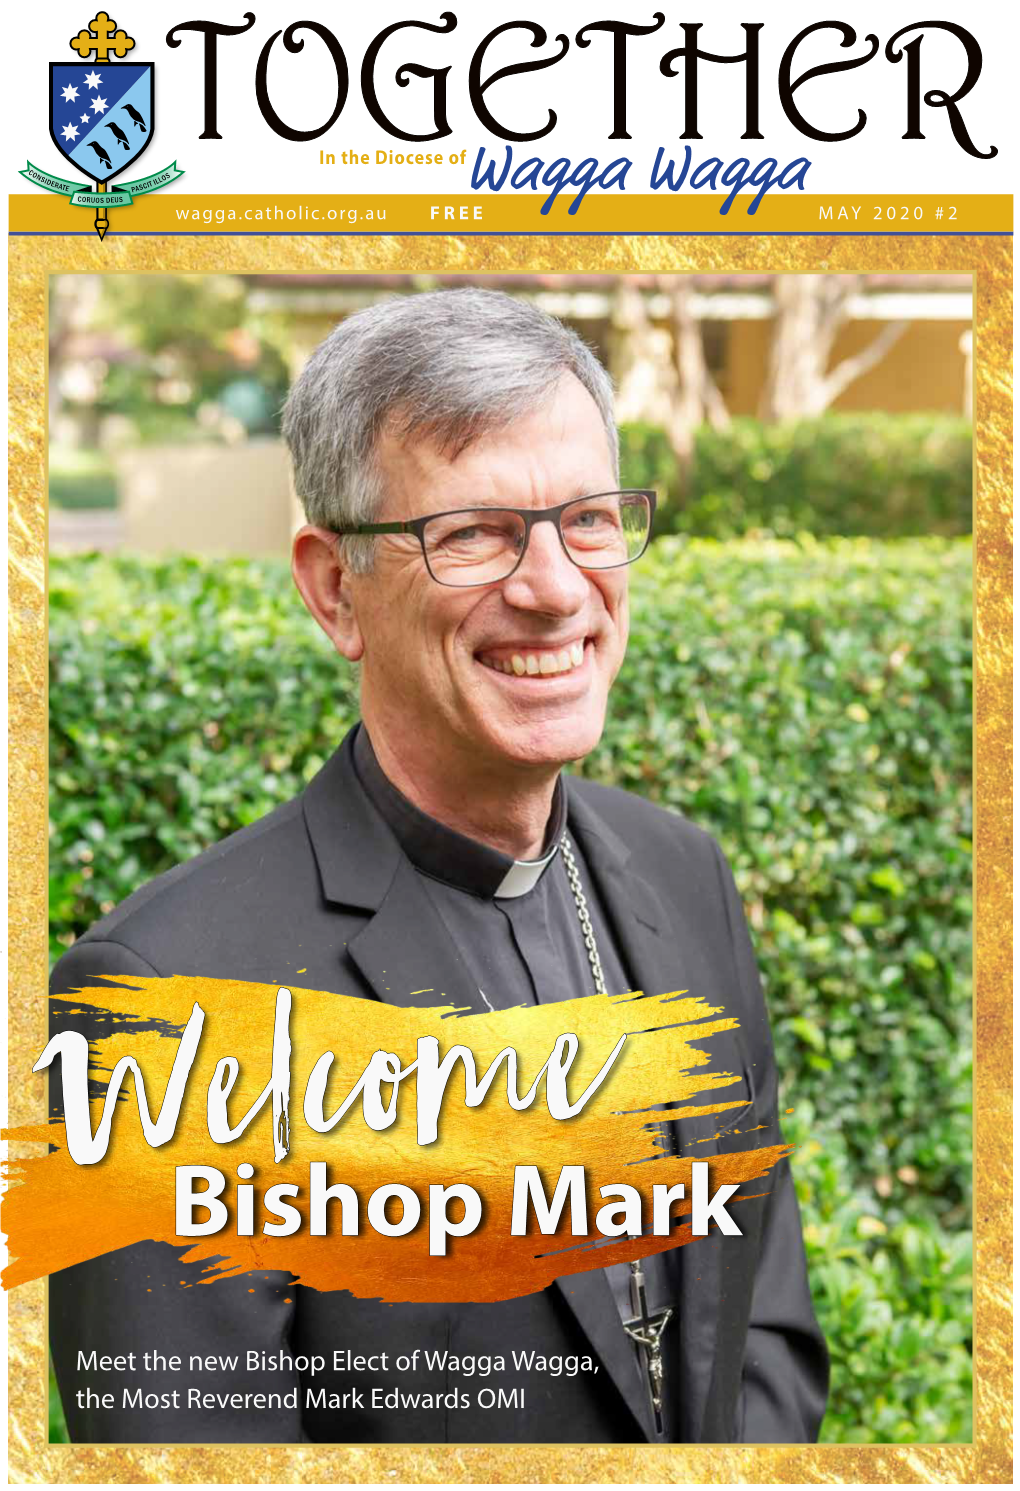 Meet the New Bishop Elect of Wagga Wagga, the Most Reverend